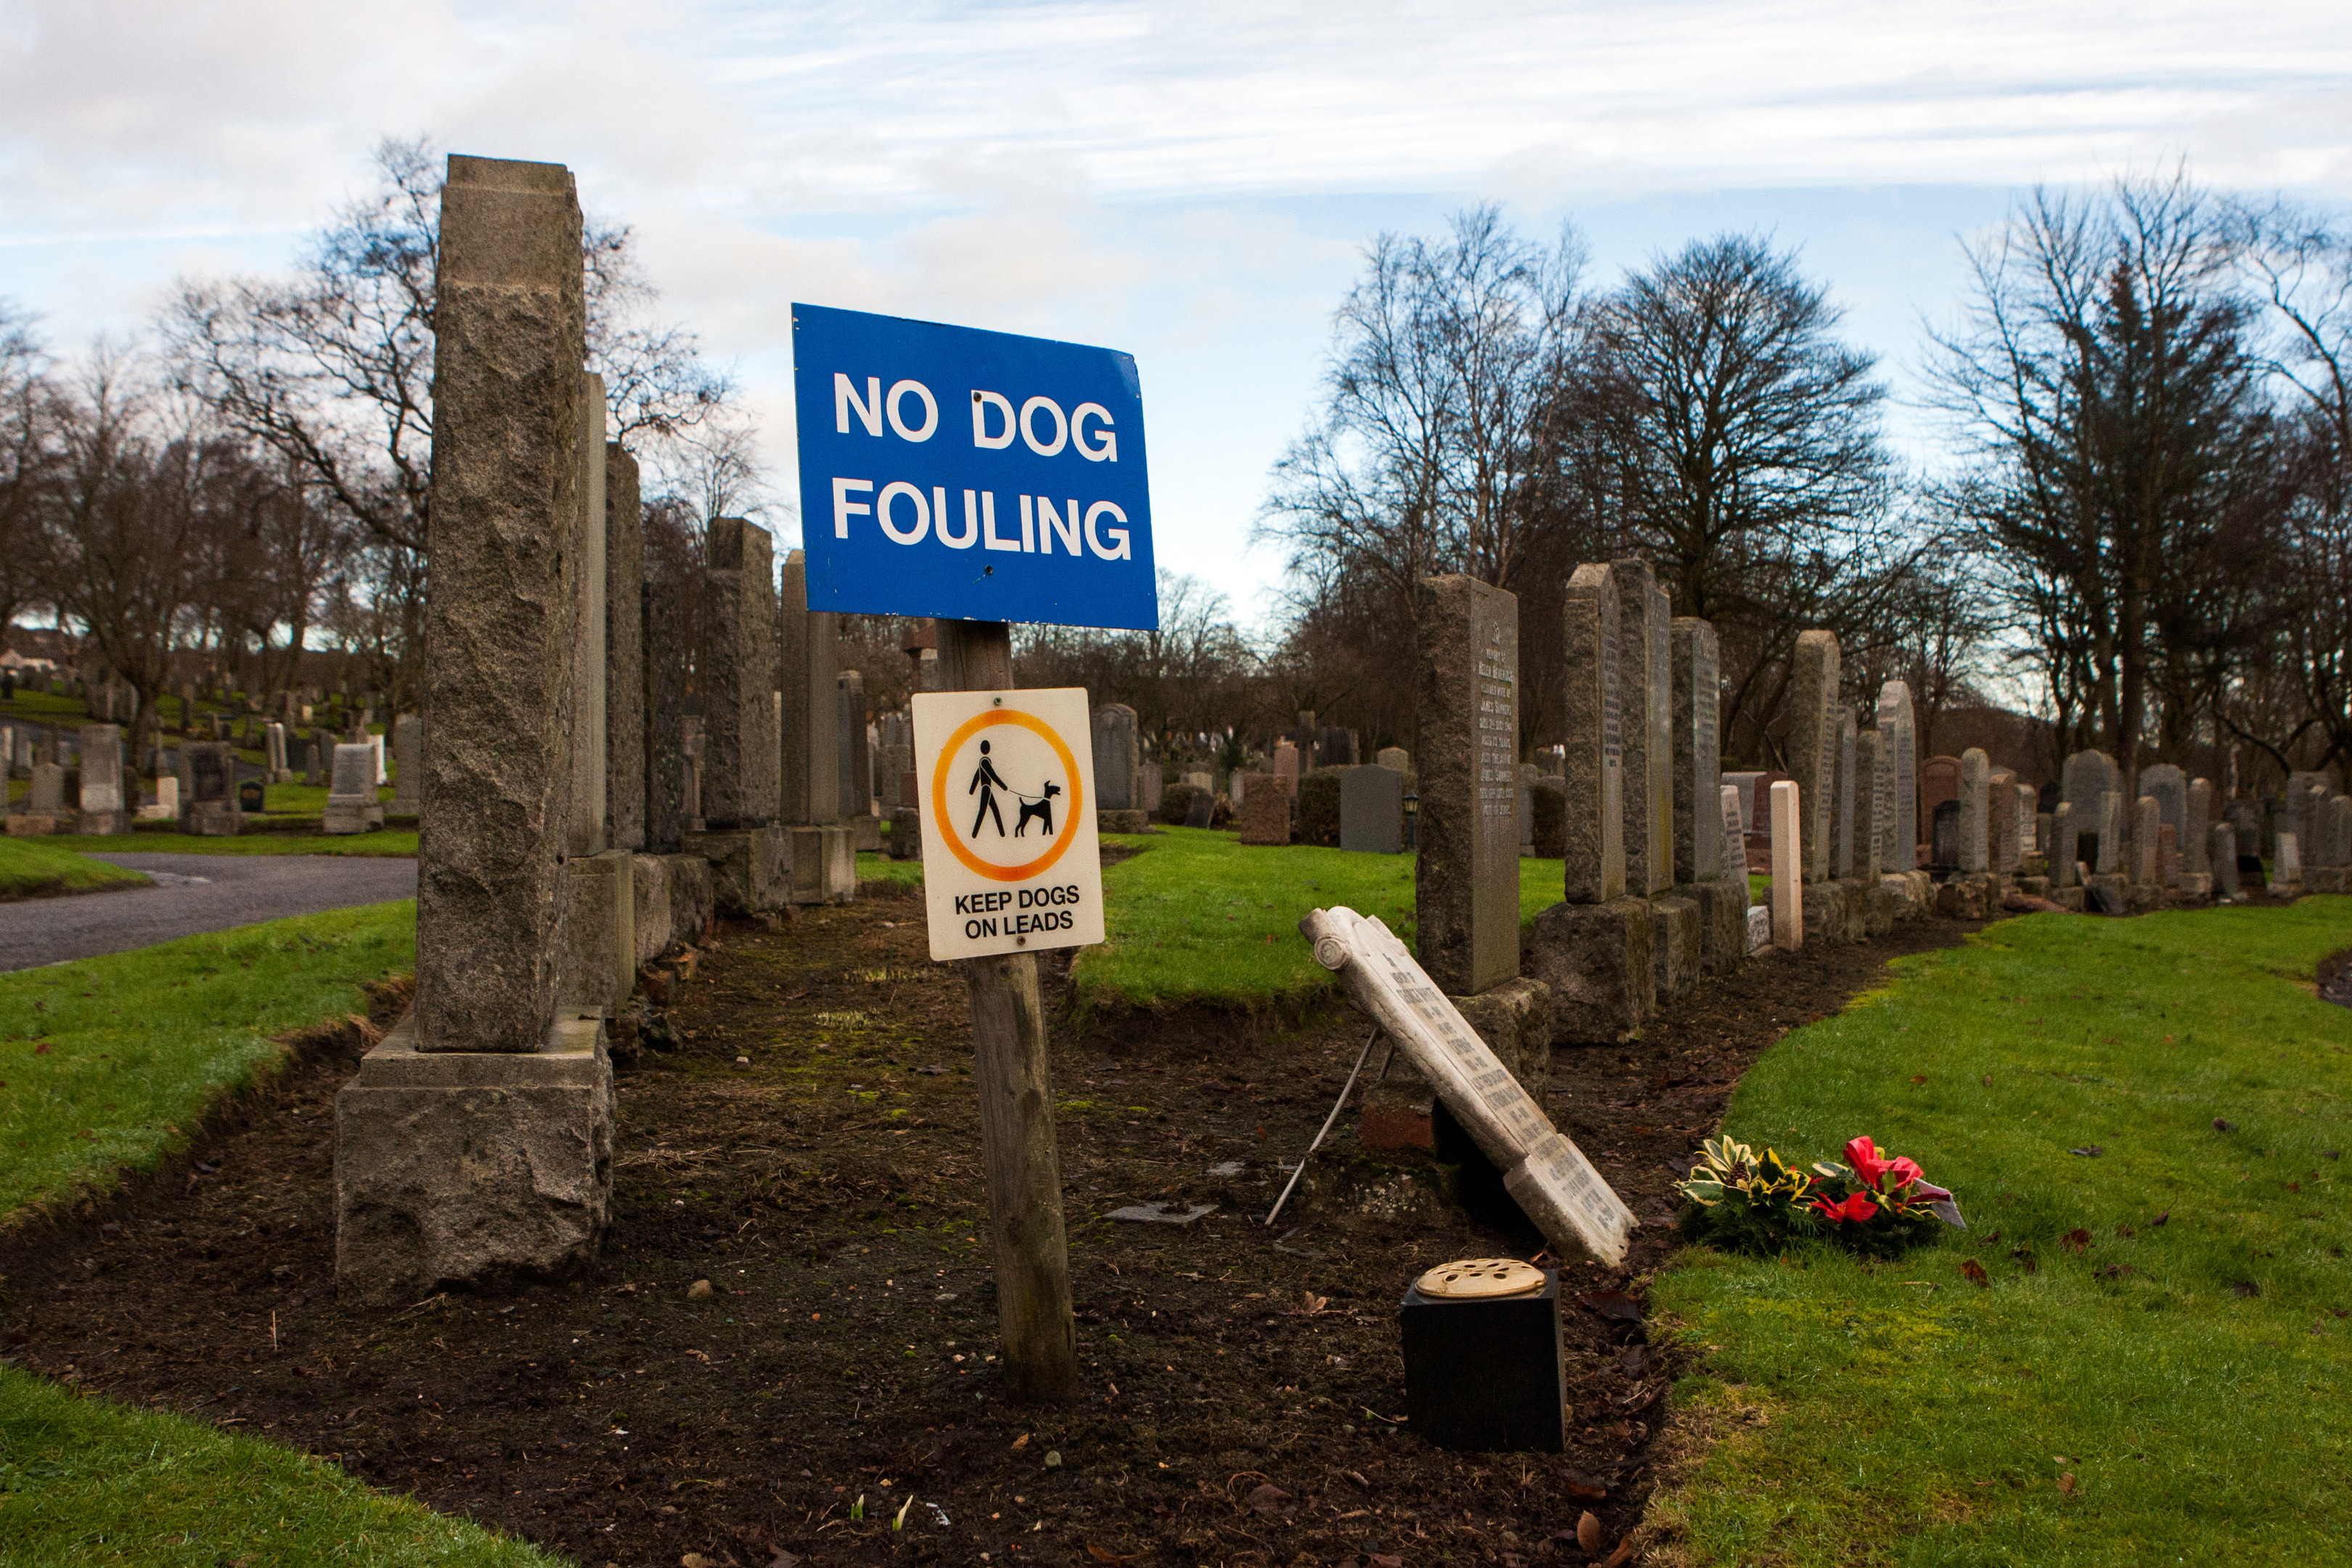 The dog fouling problem has recently been highlighted at a graveyard in Halbeath - but it's happening all over the Kingdom.